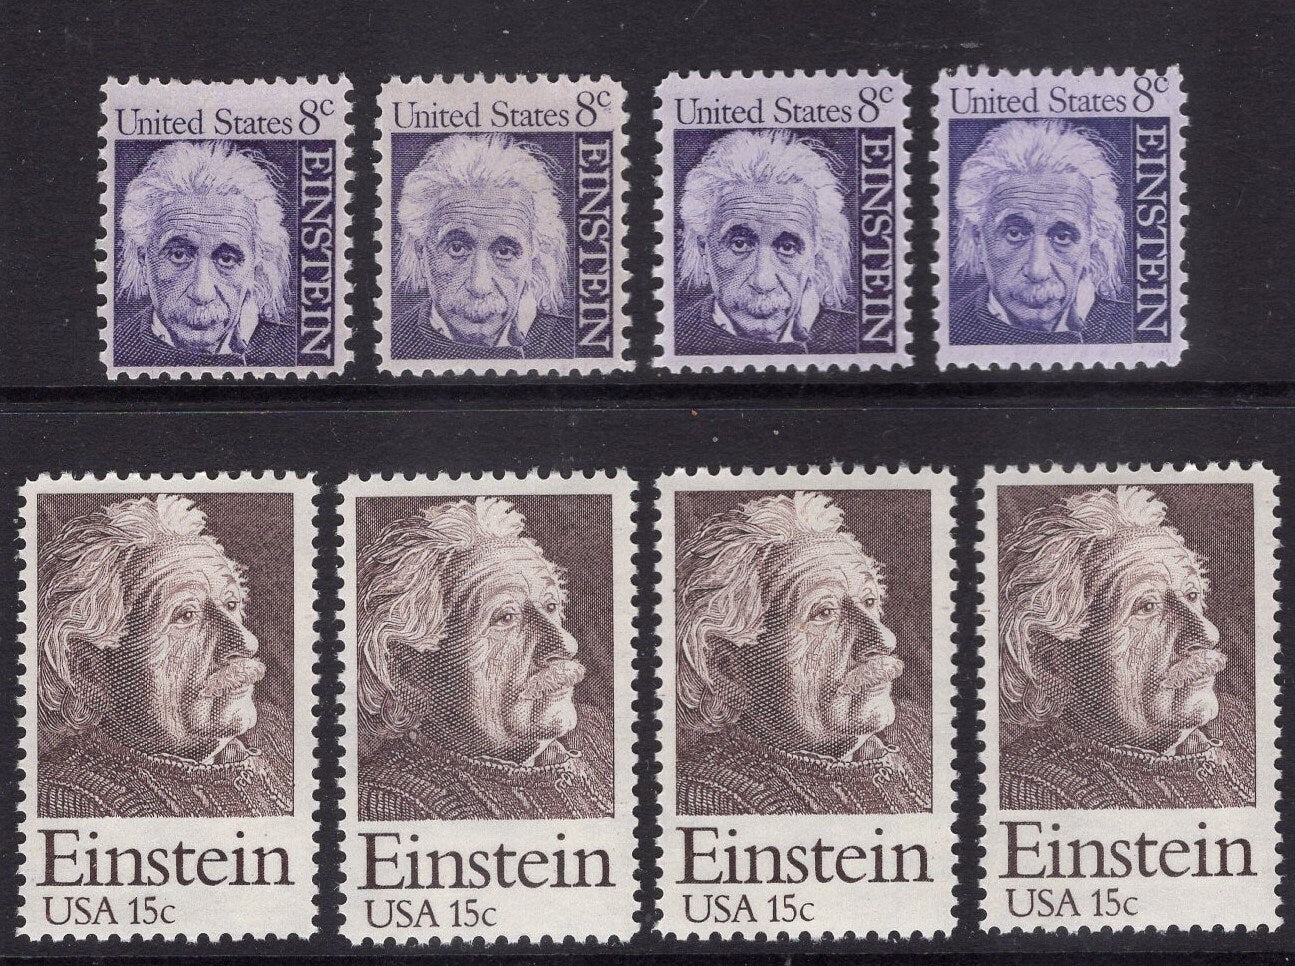 8 ALBERT EINSTEIN STAMPS Theory of Relativity - Physics - Physicist - Jewish Issued in 1960 - s1285 -